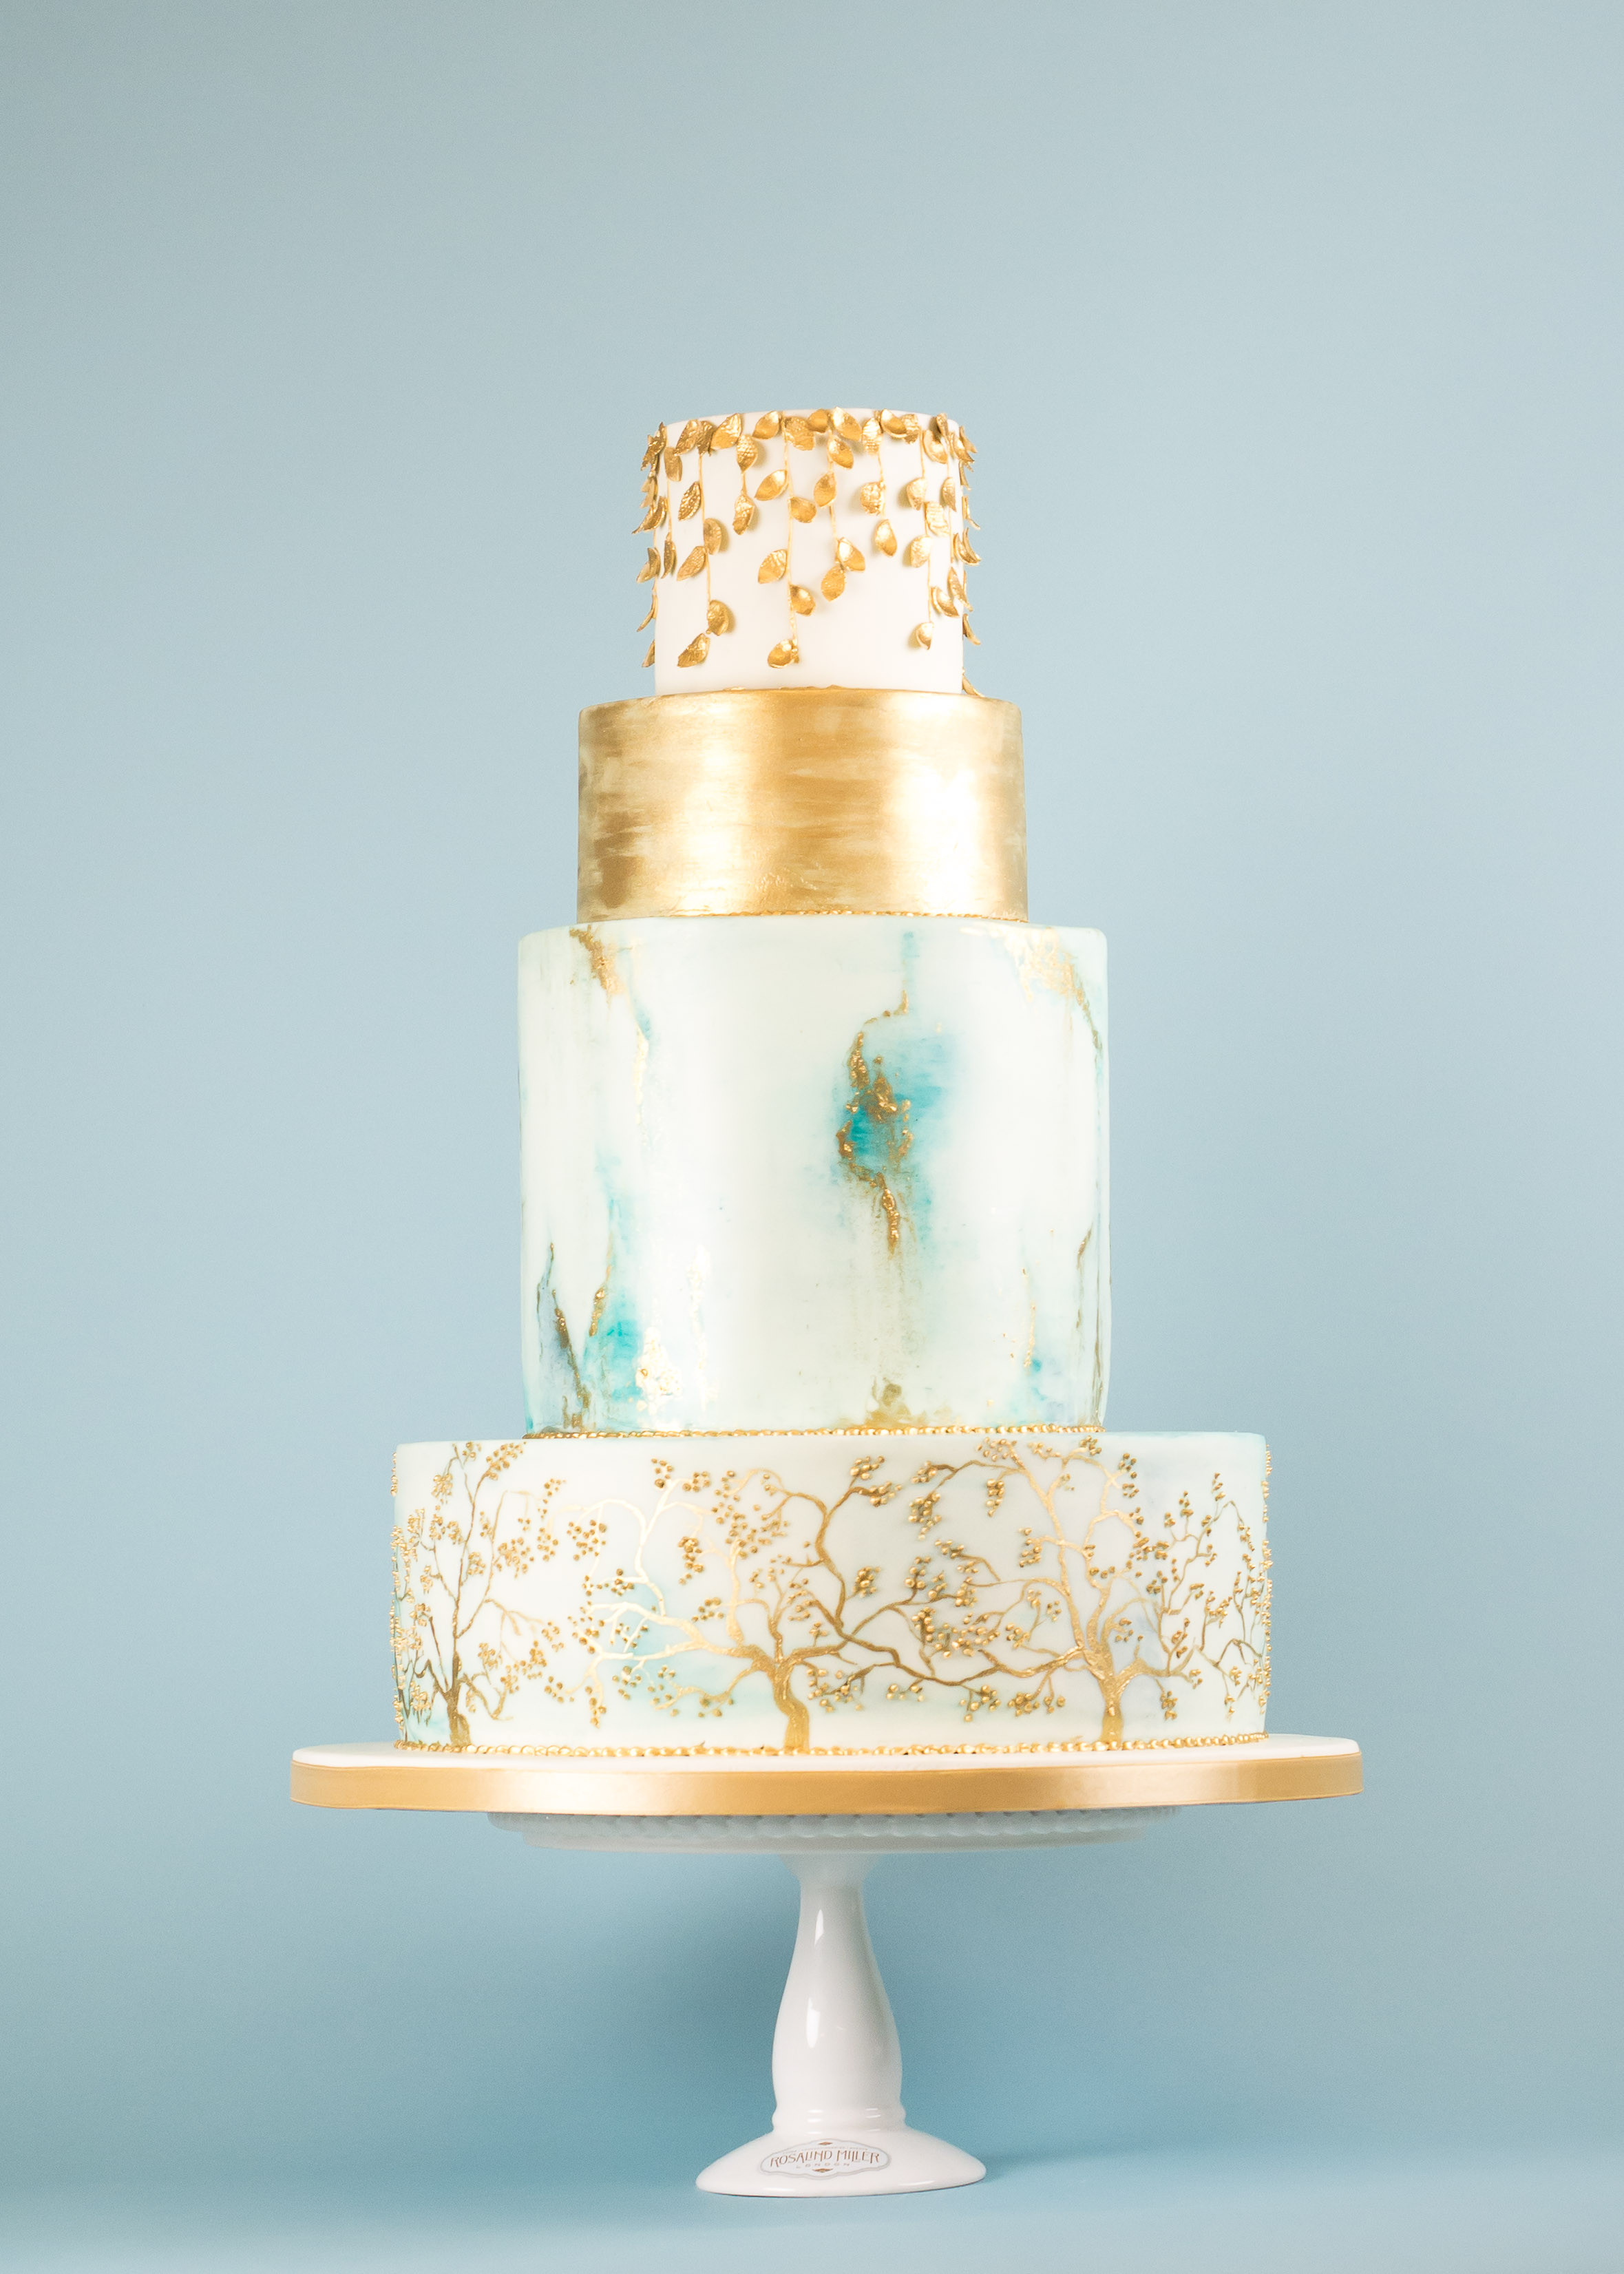 Wedding Cakes 2017
 The top 17 wedding cake trends for 2017